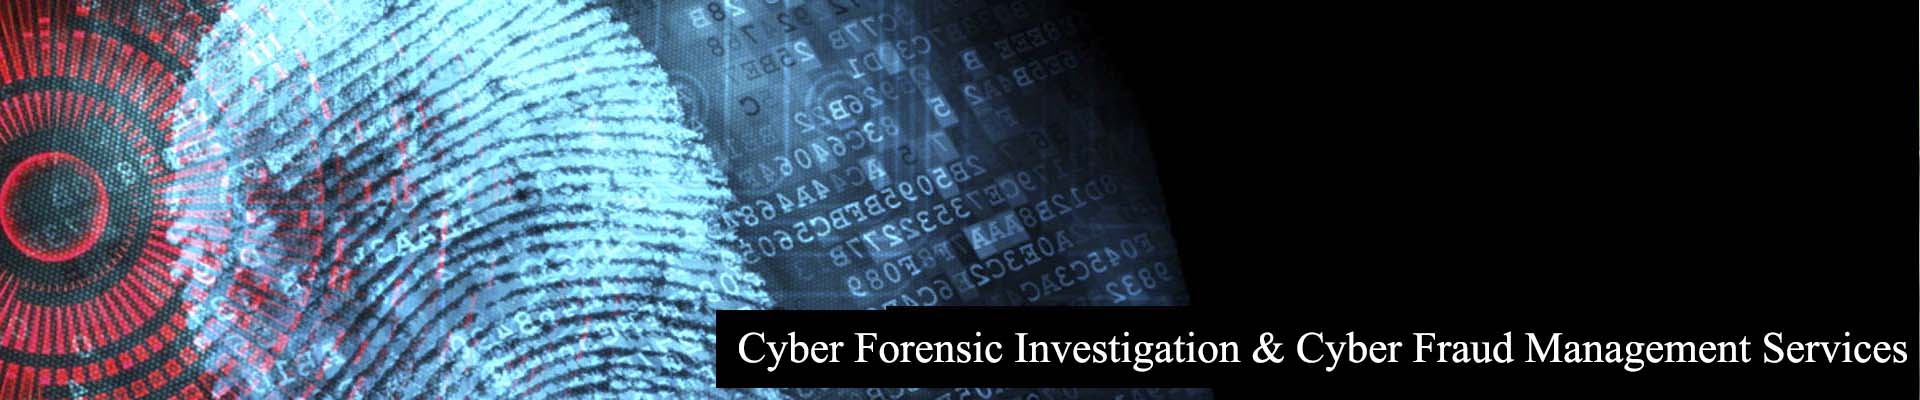 Cyber Fornsic Services & Digital Forensics Services - Codec Networks